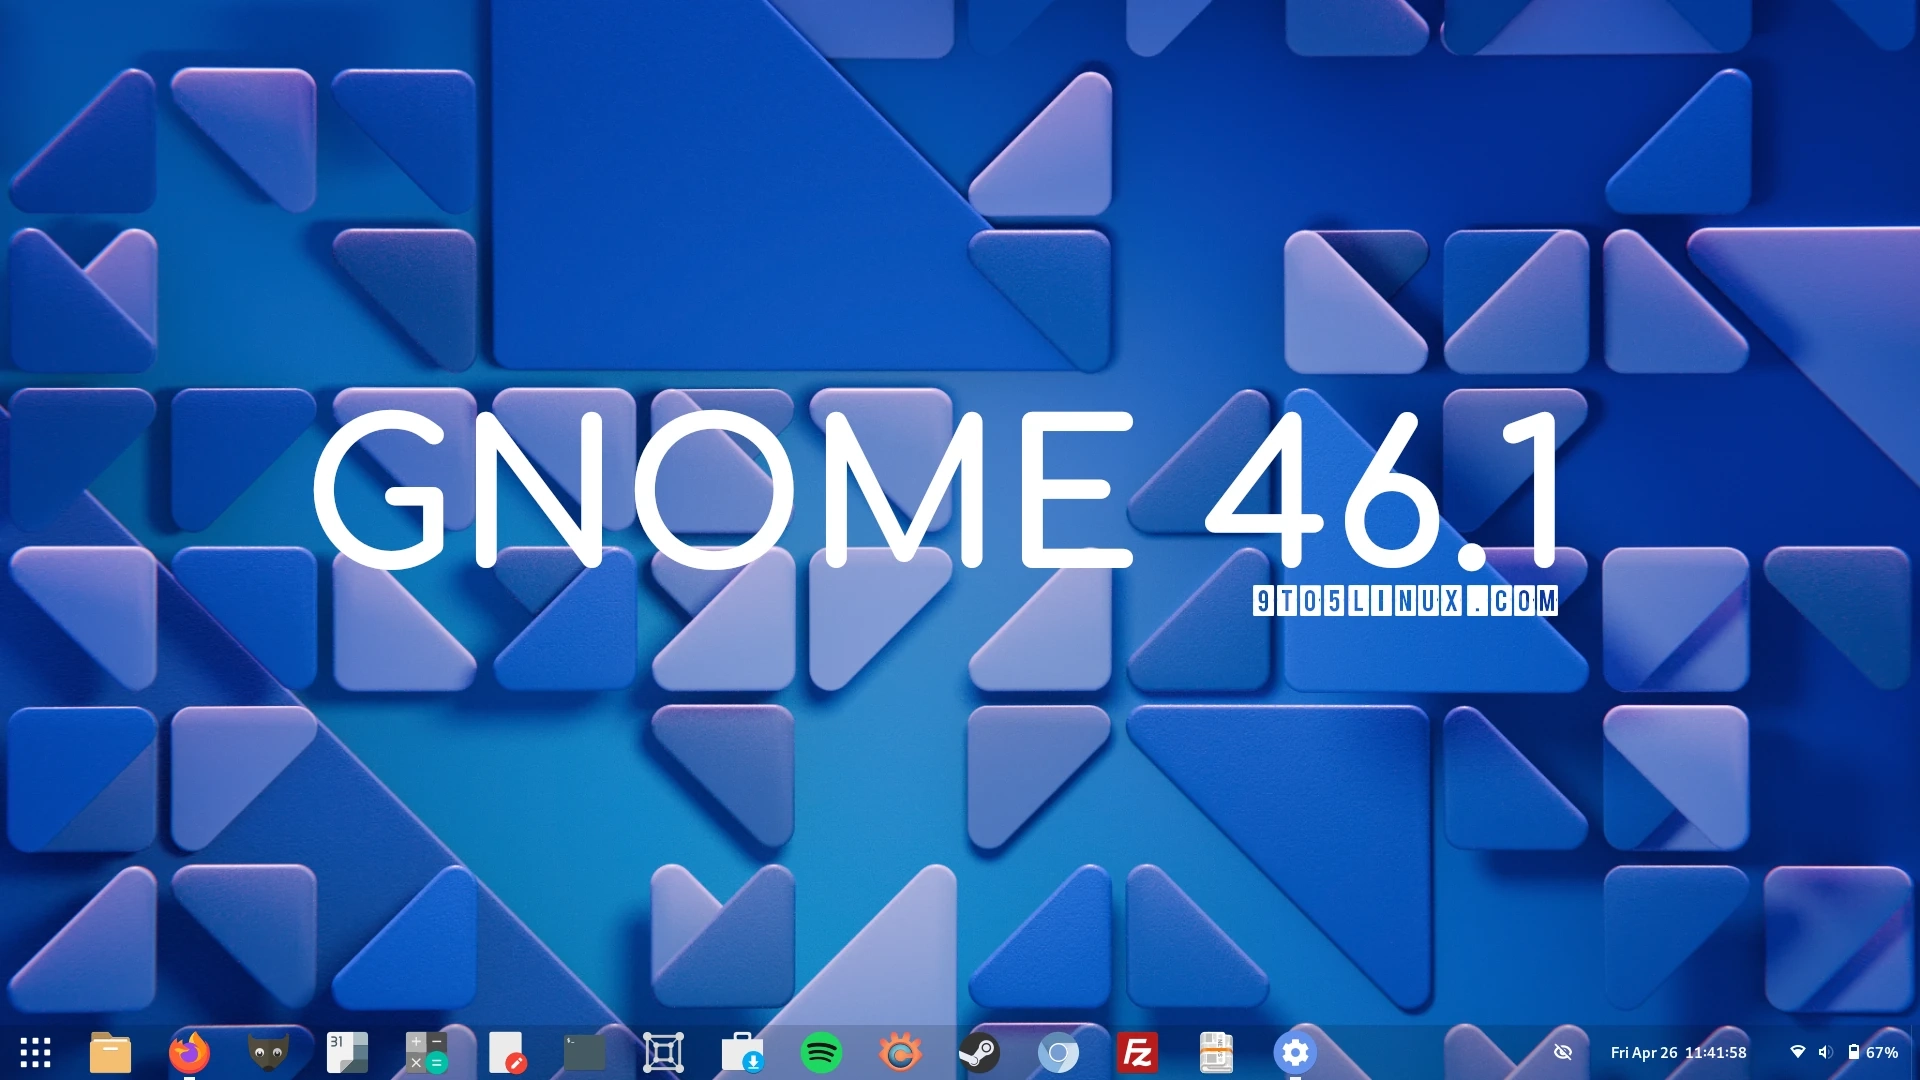 GNOME 46.1: The Latest Desktop Environment with Enhanced Sync Support Now Available